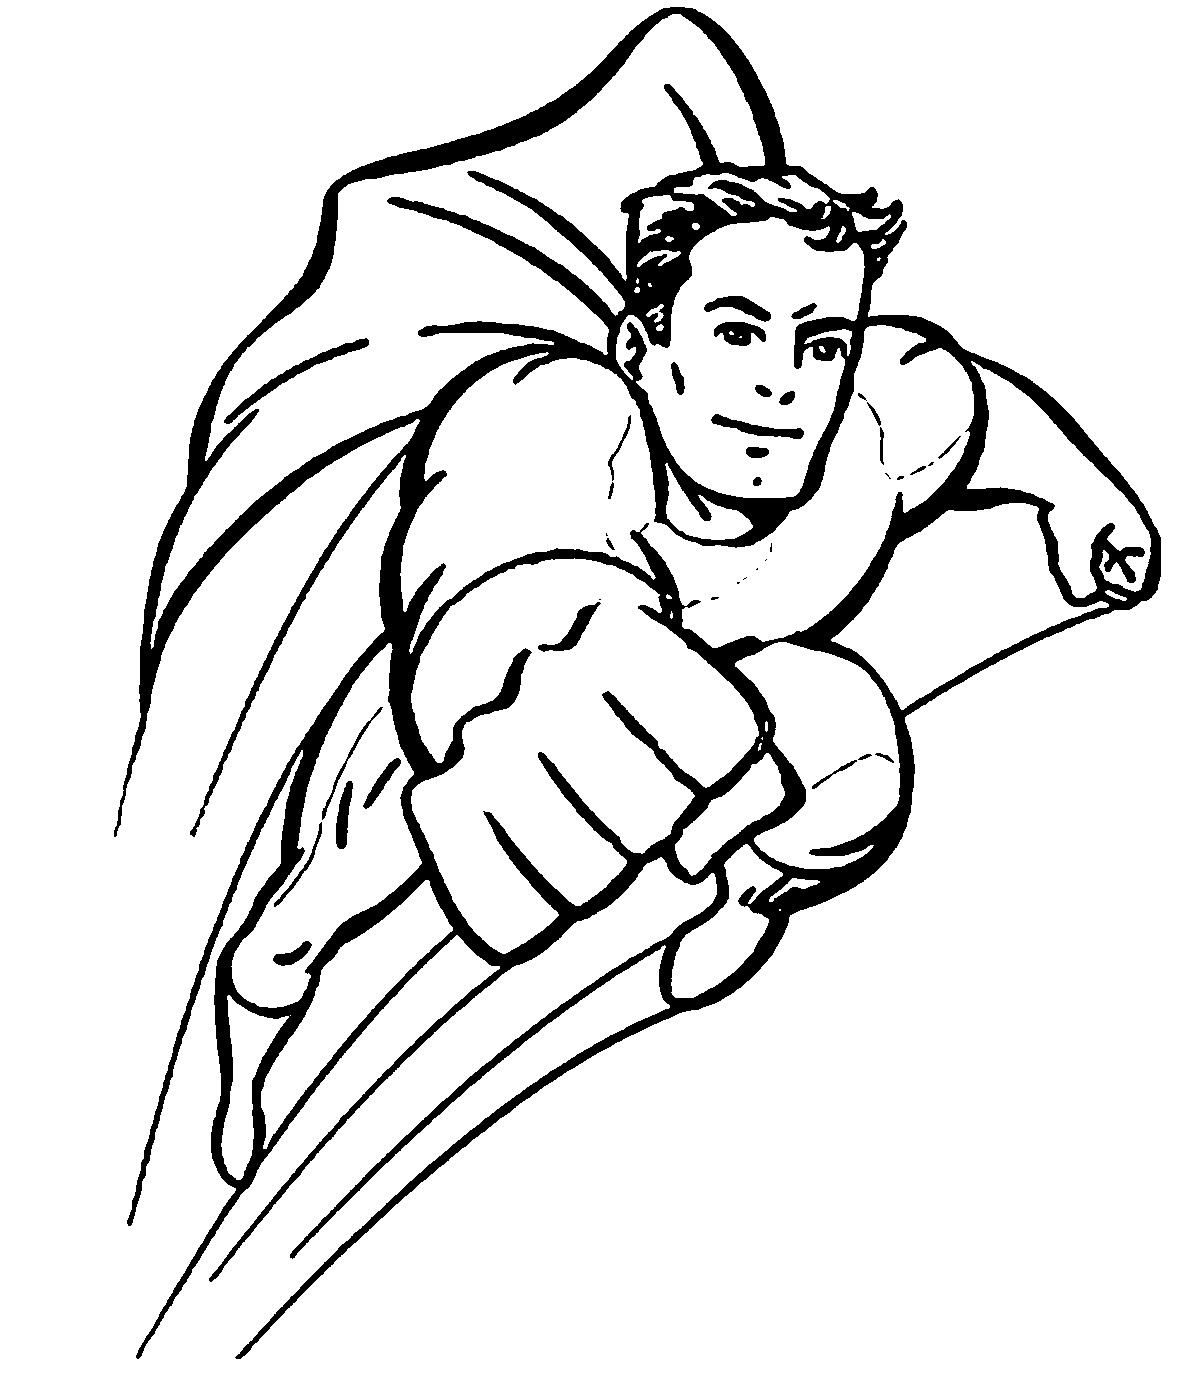 Super Hero Coloring Book Pages
 Desert Bus for Hope Blog